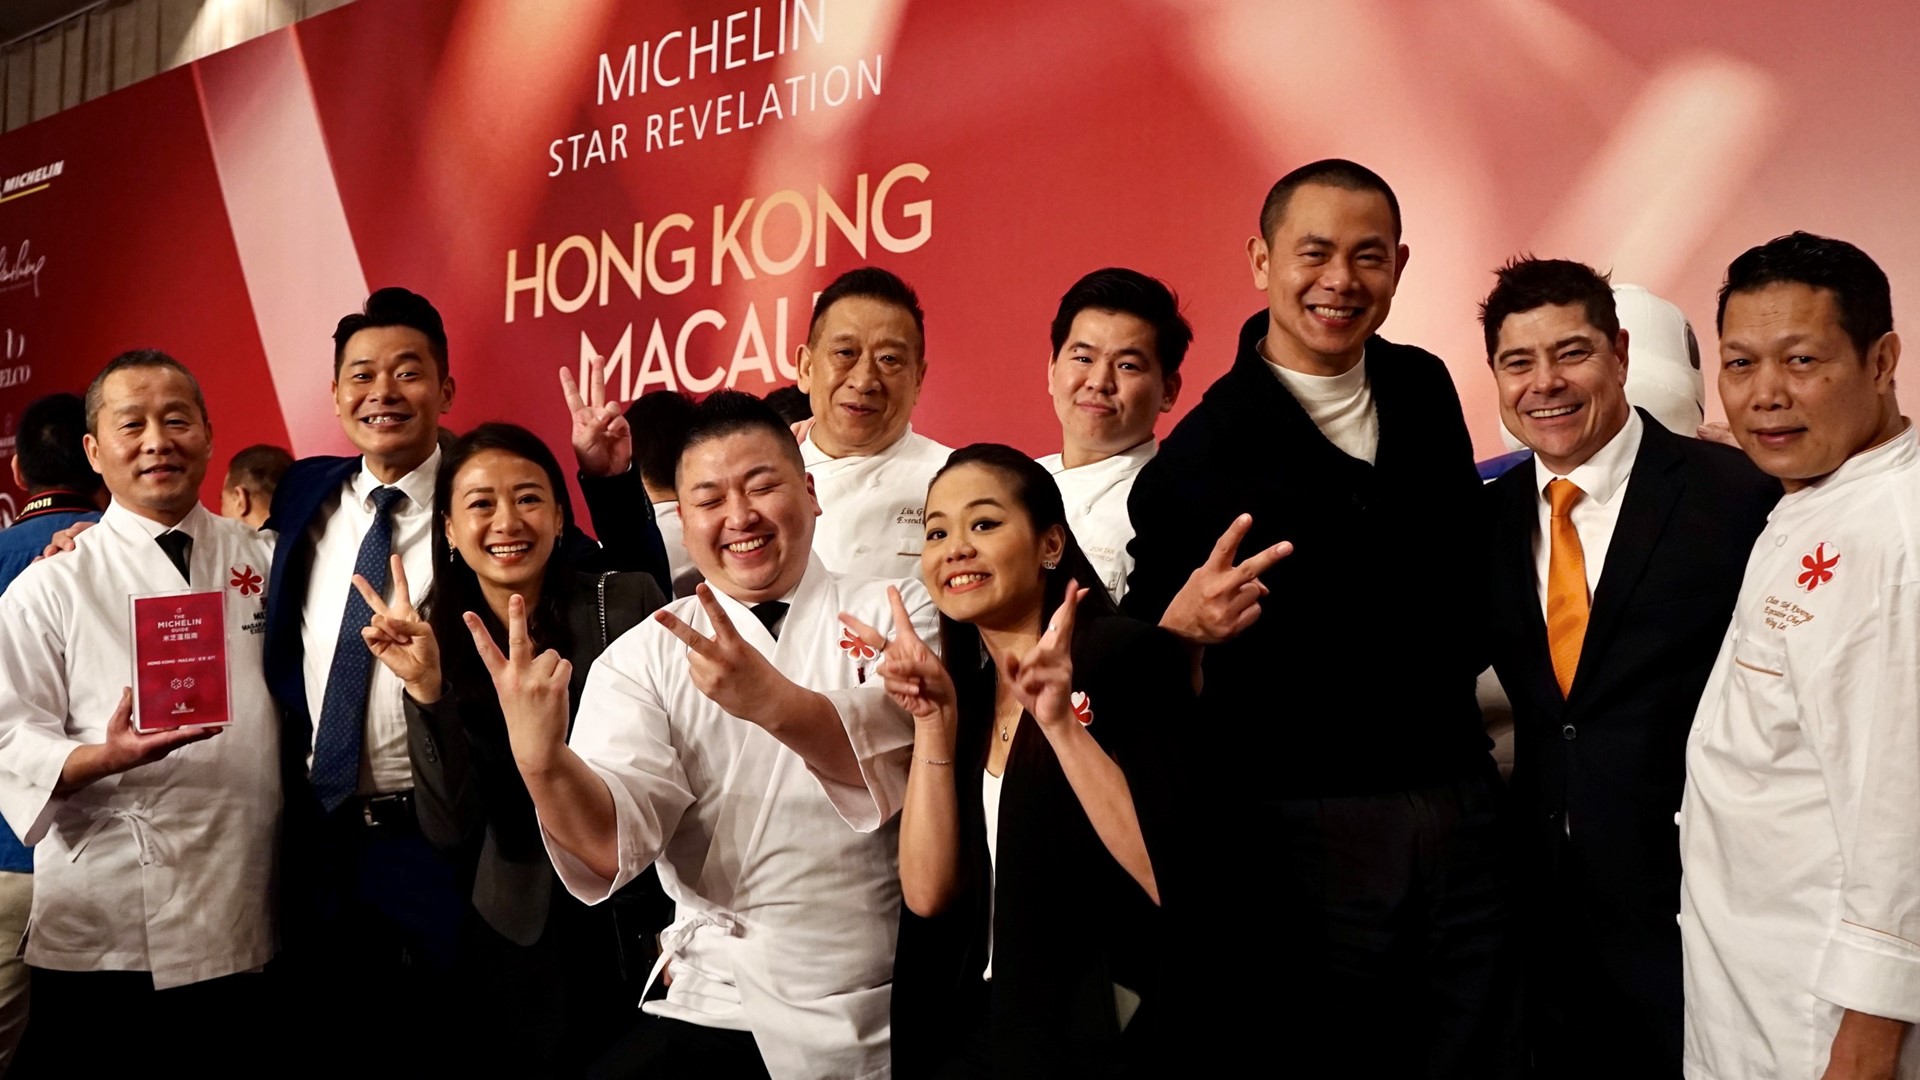 Wynn receives a total of eight Michelin stars from the Michelin Guide Hong Kong & Macau 2020